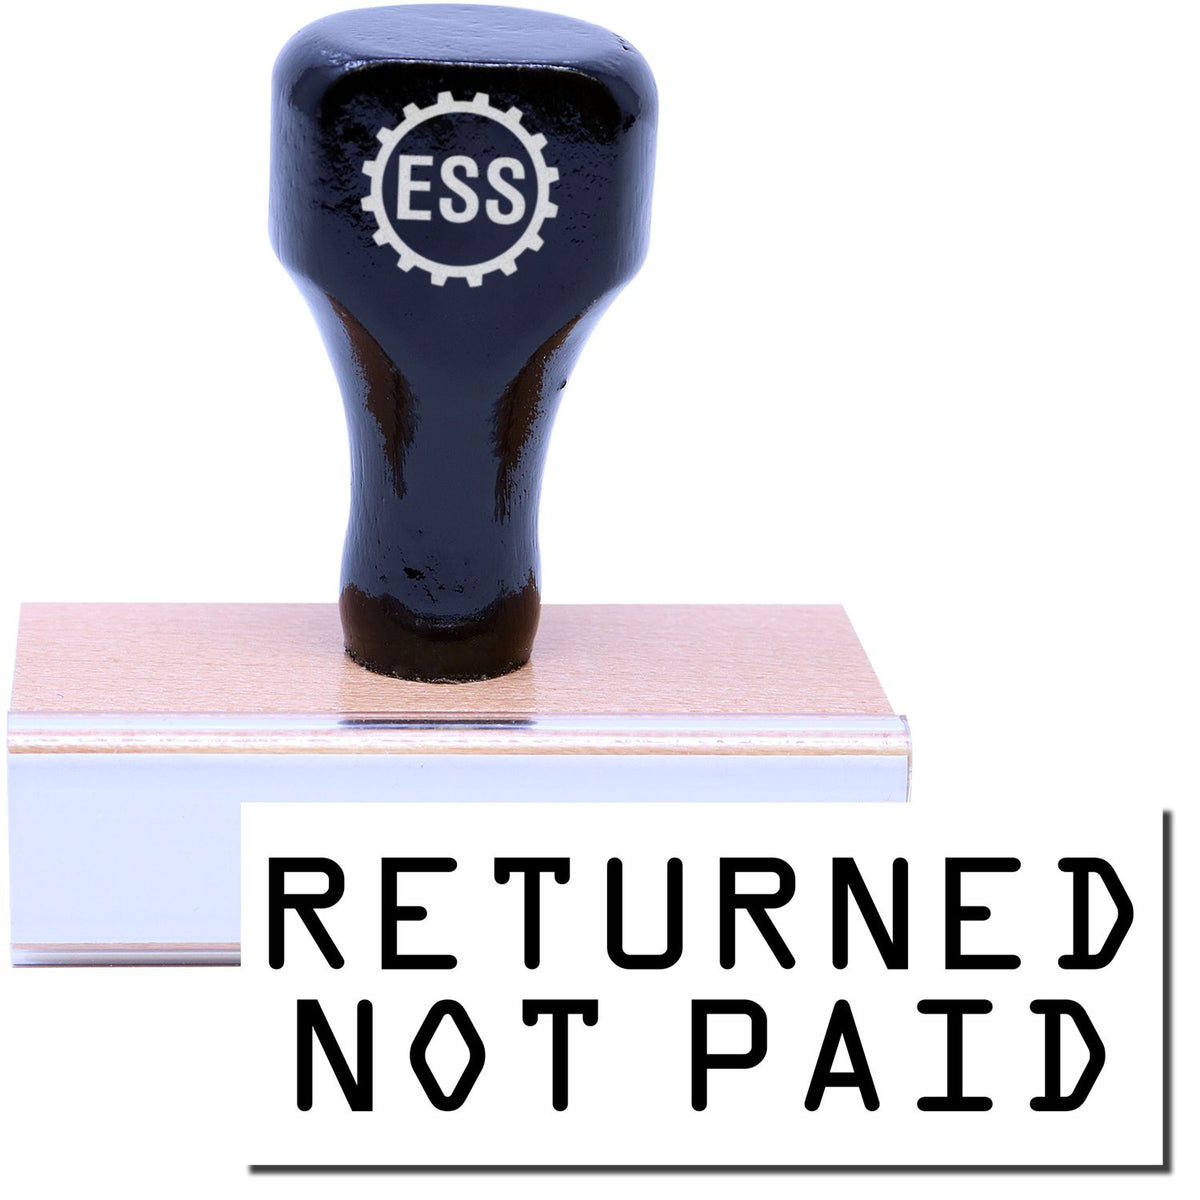 A stock office rubber stamp with a stamped image showing how the text &quot;RETURNED NOT PAID&quot; is displayed after stamping.